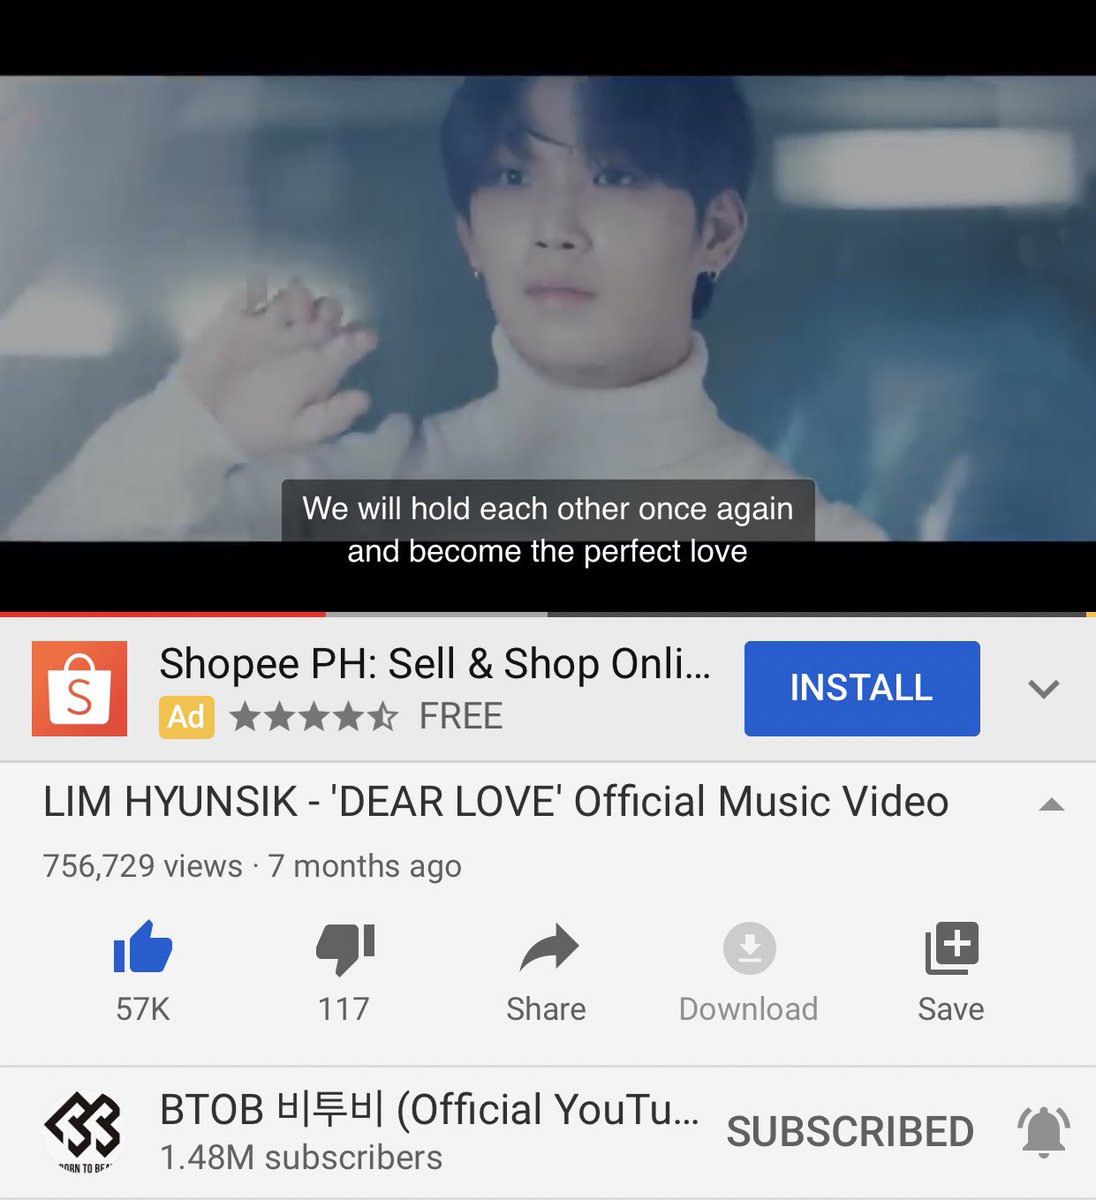 Dear Love view count streaming thread 16MAY2020 10:58PM KST756,729